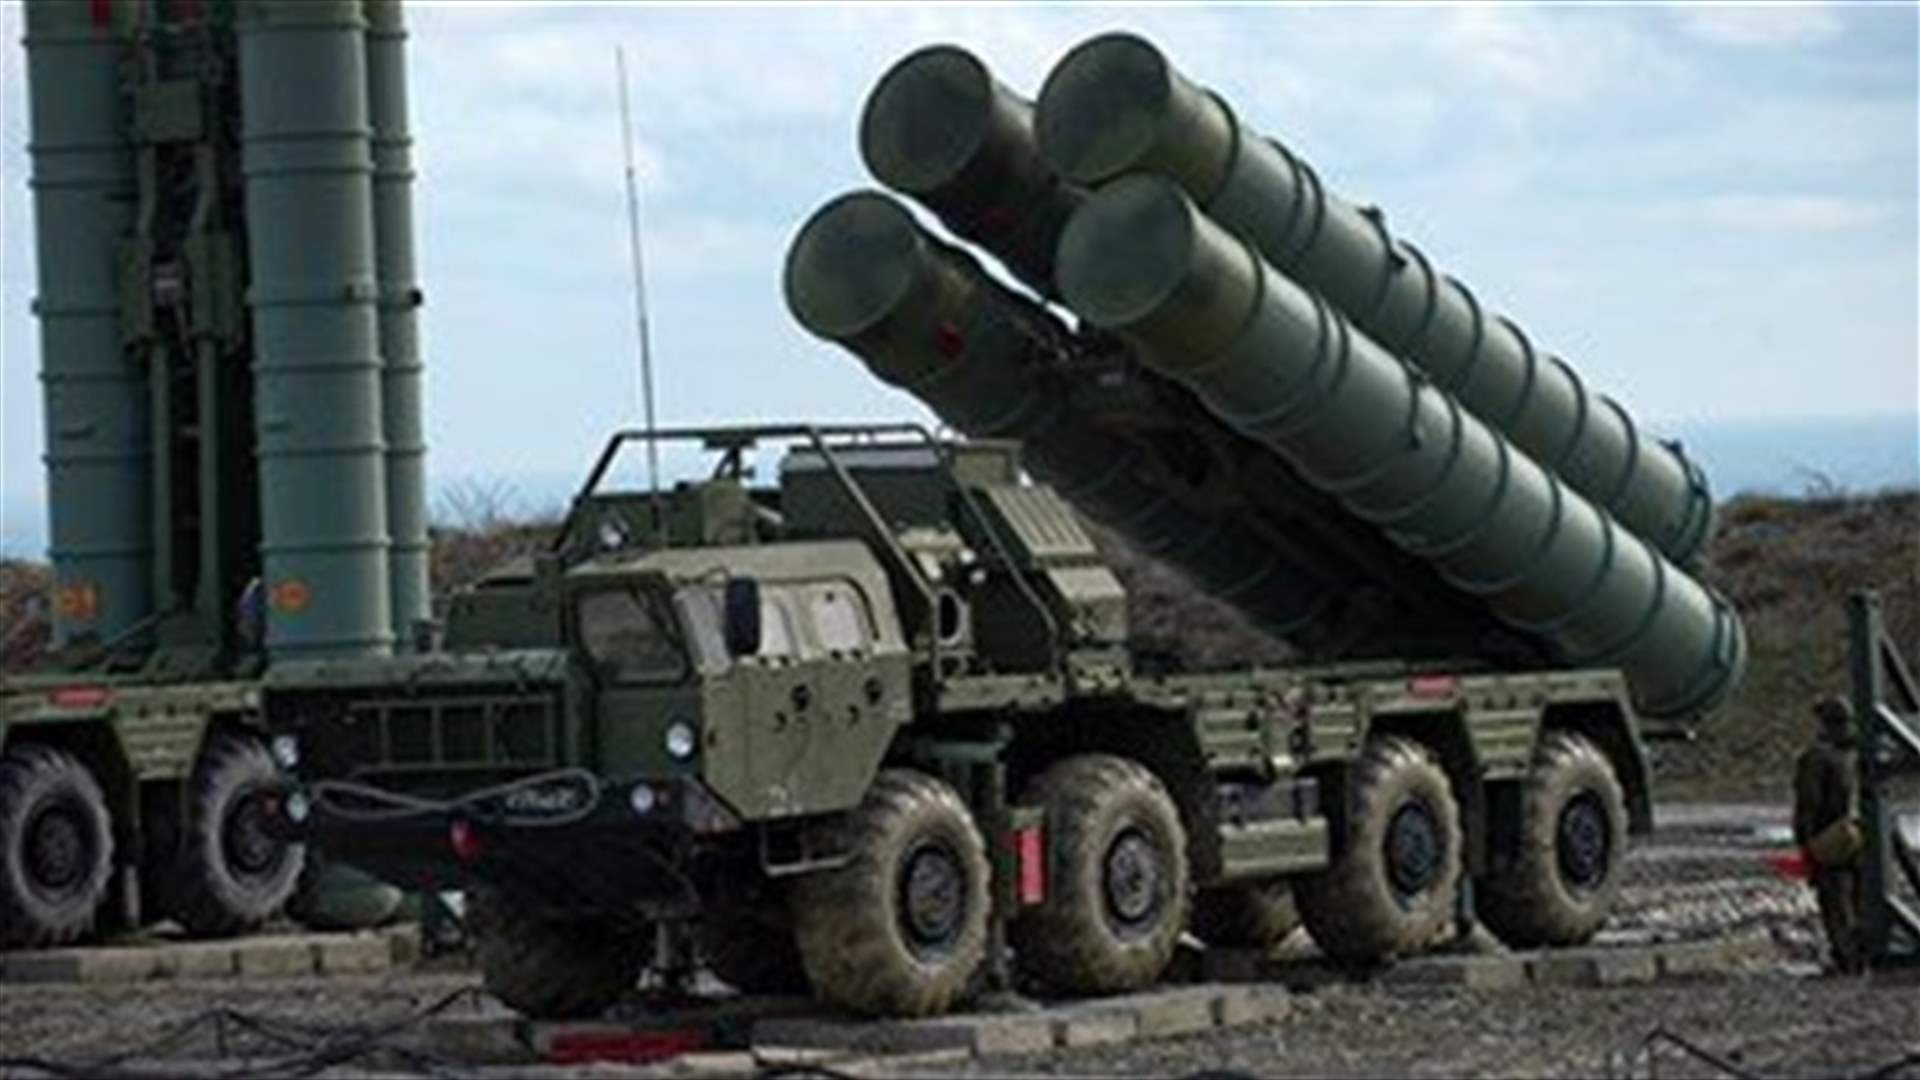 Turkey says it bought Russian S-400s to use them, not put them aside